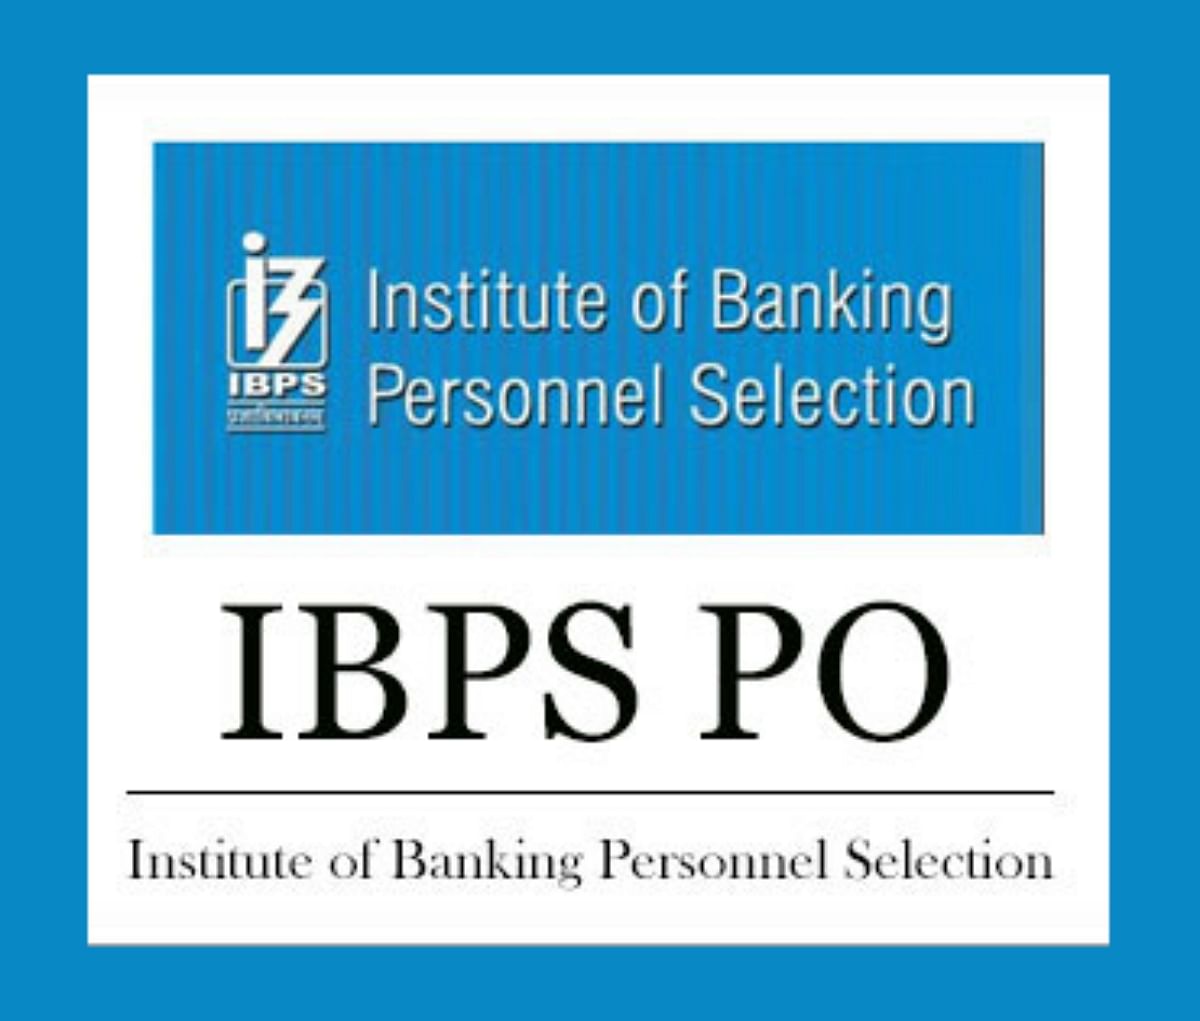 IBPS PO Admit Card 2021 for Interview Out Now, Direct Link to Download Here